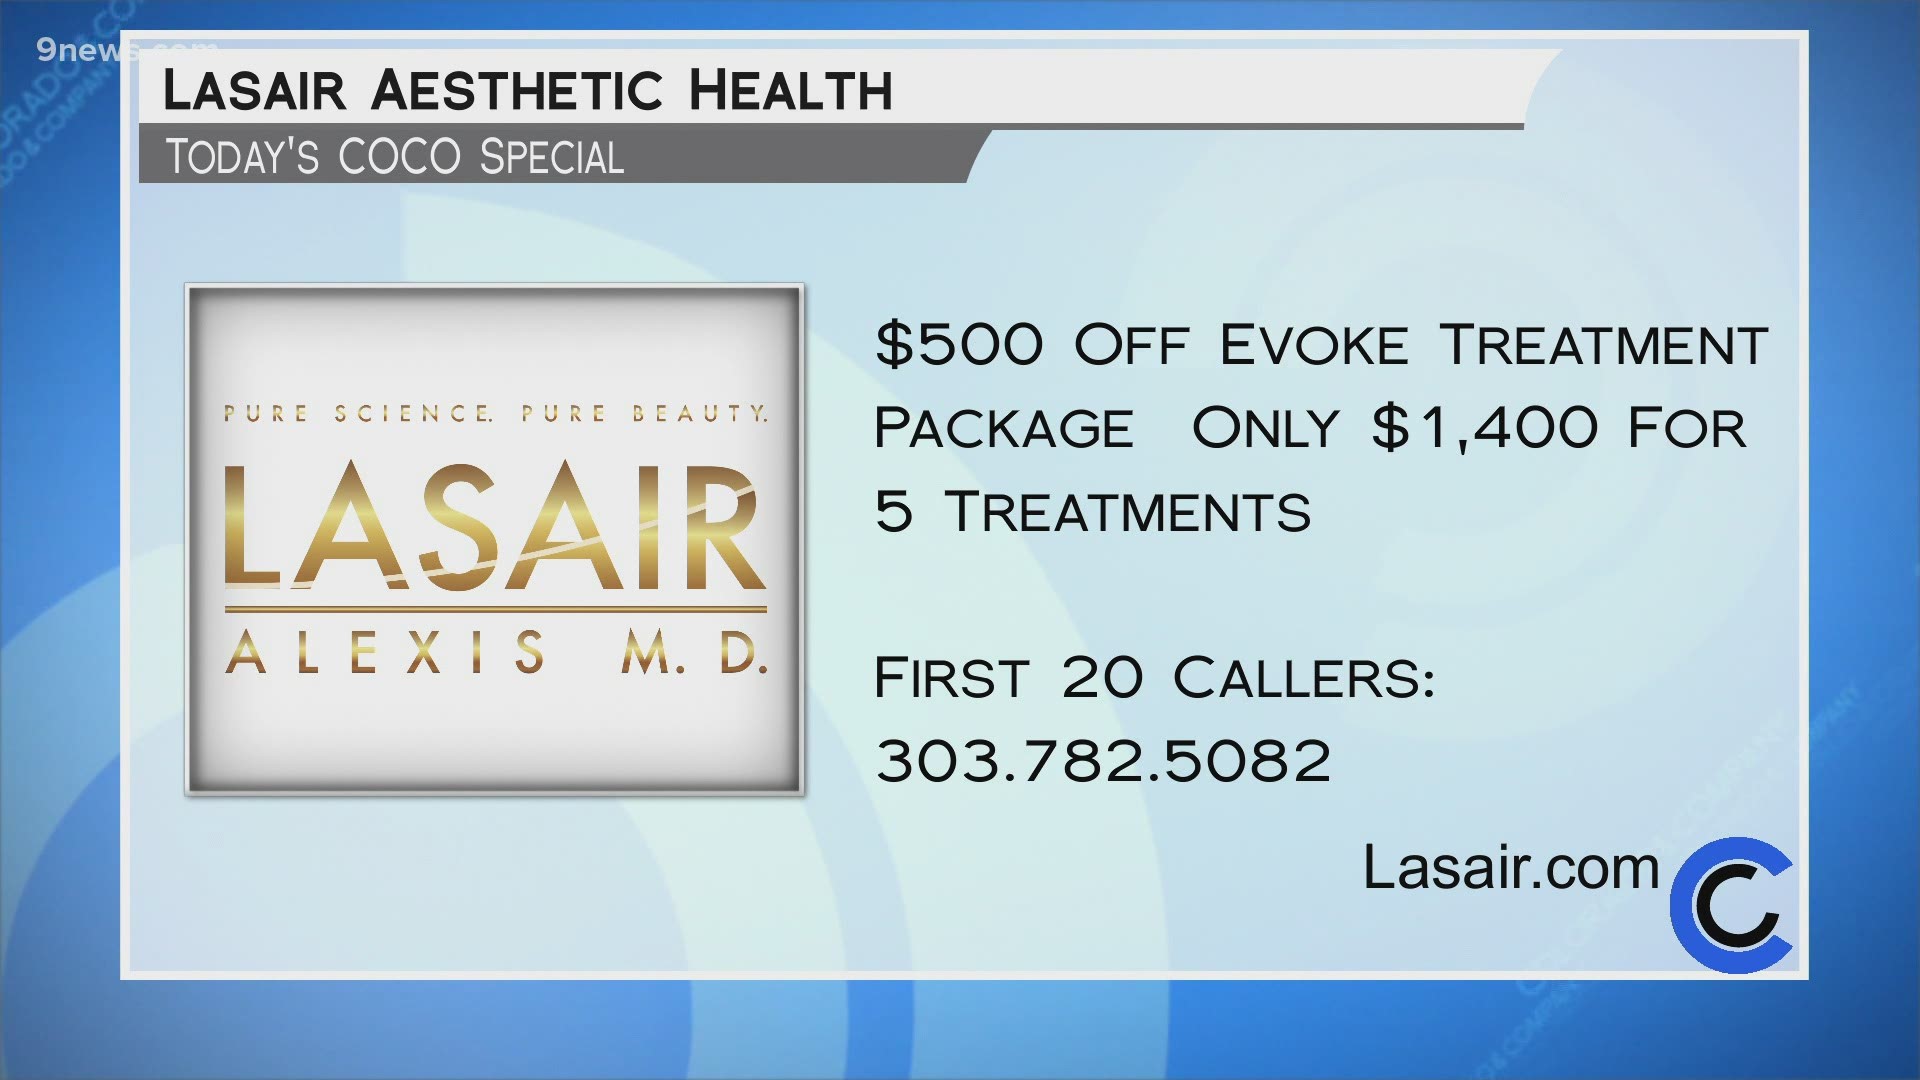 Call 303.782.5082 or visit Lasair.com to get started with great deals on overall body services.